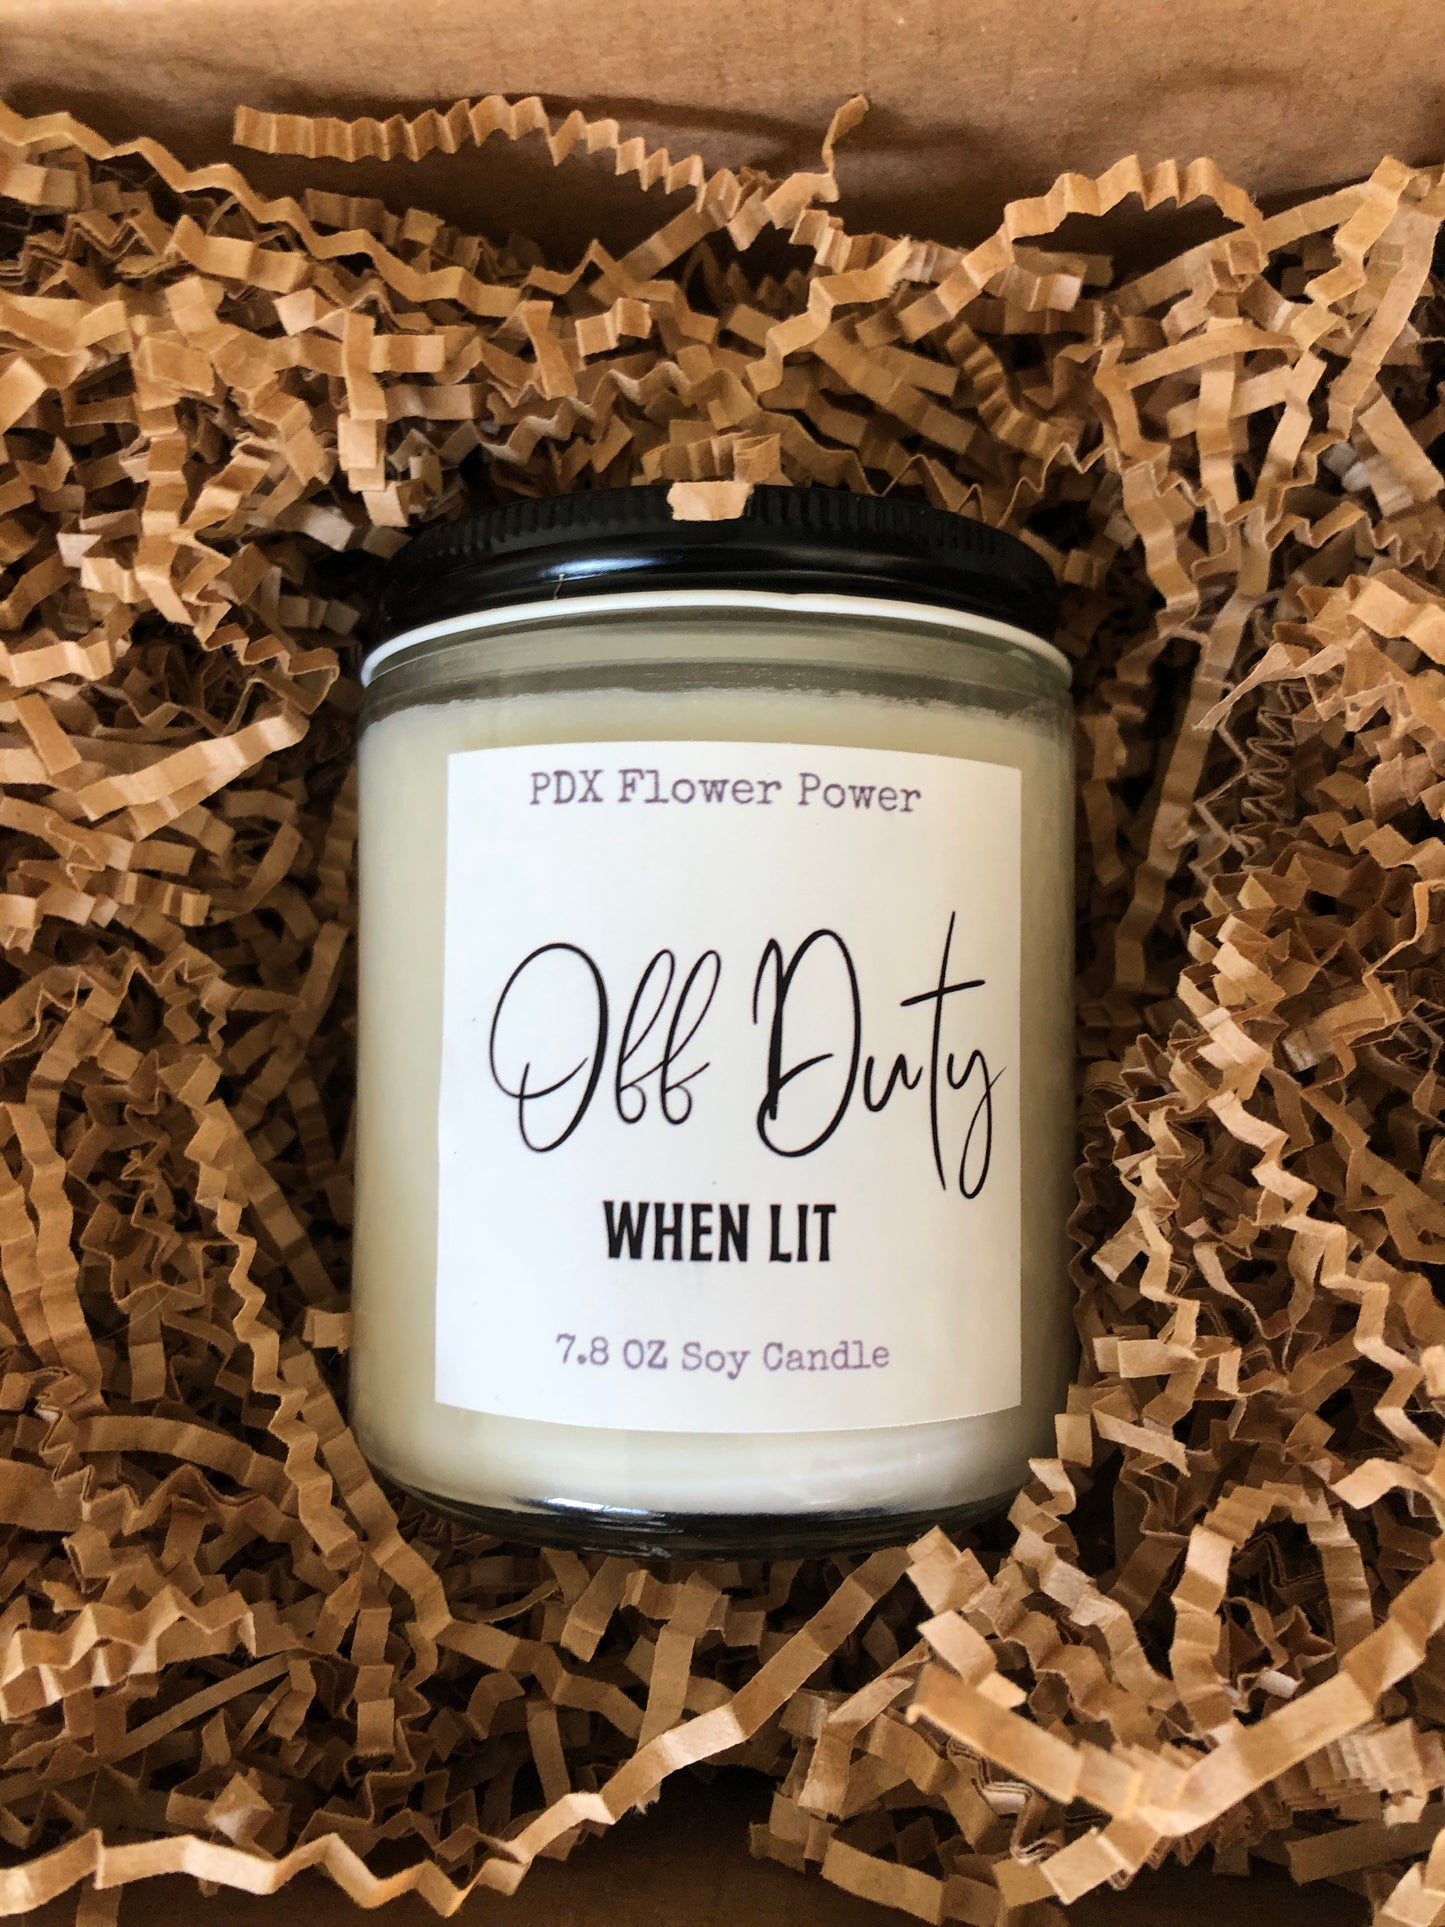 "Off Duty when lit" handcrafted soy candle